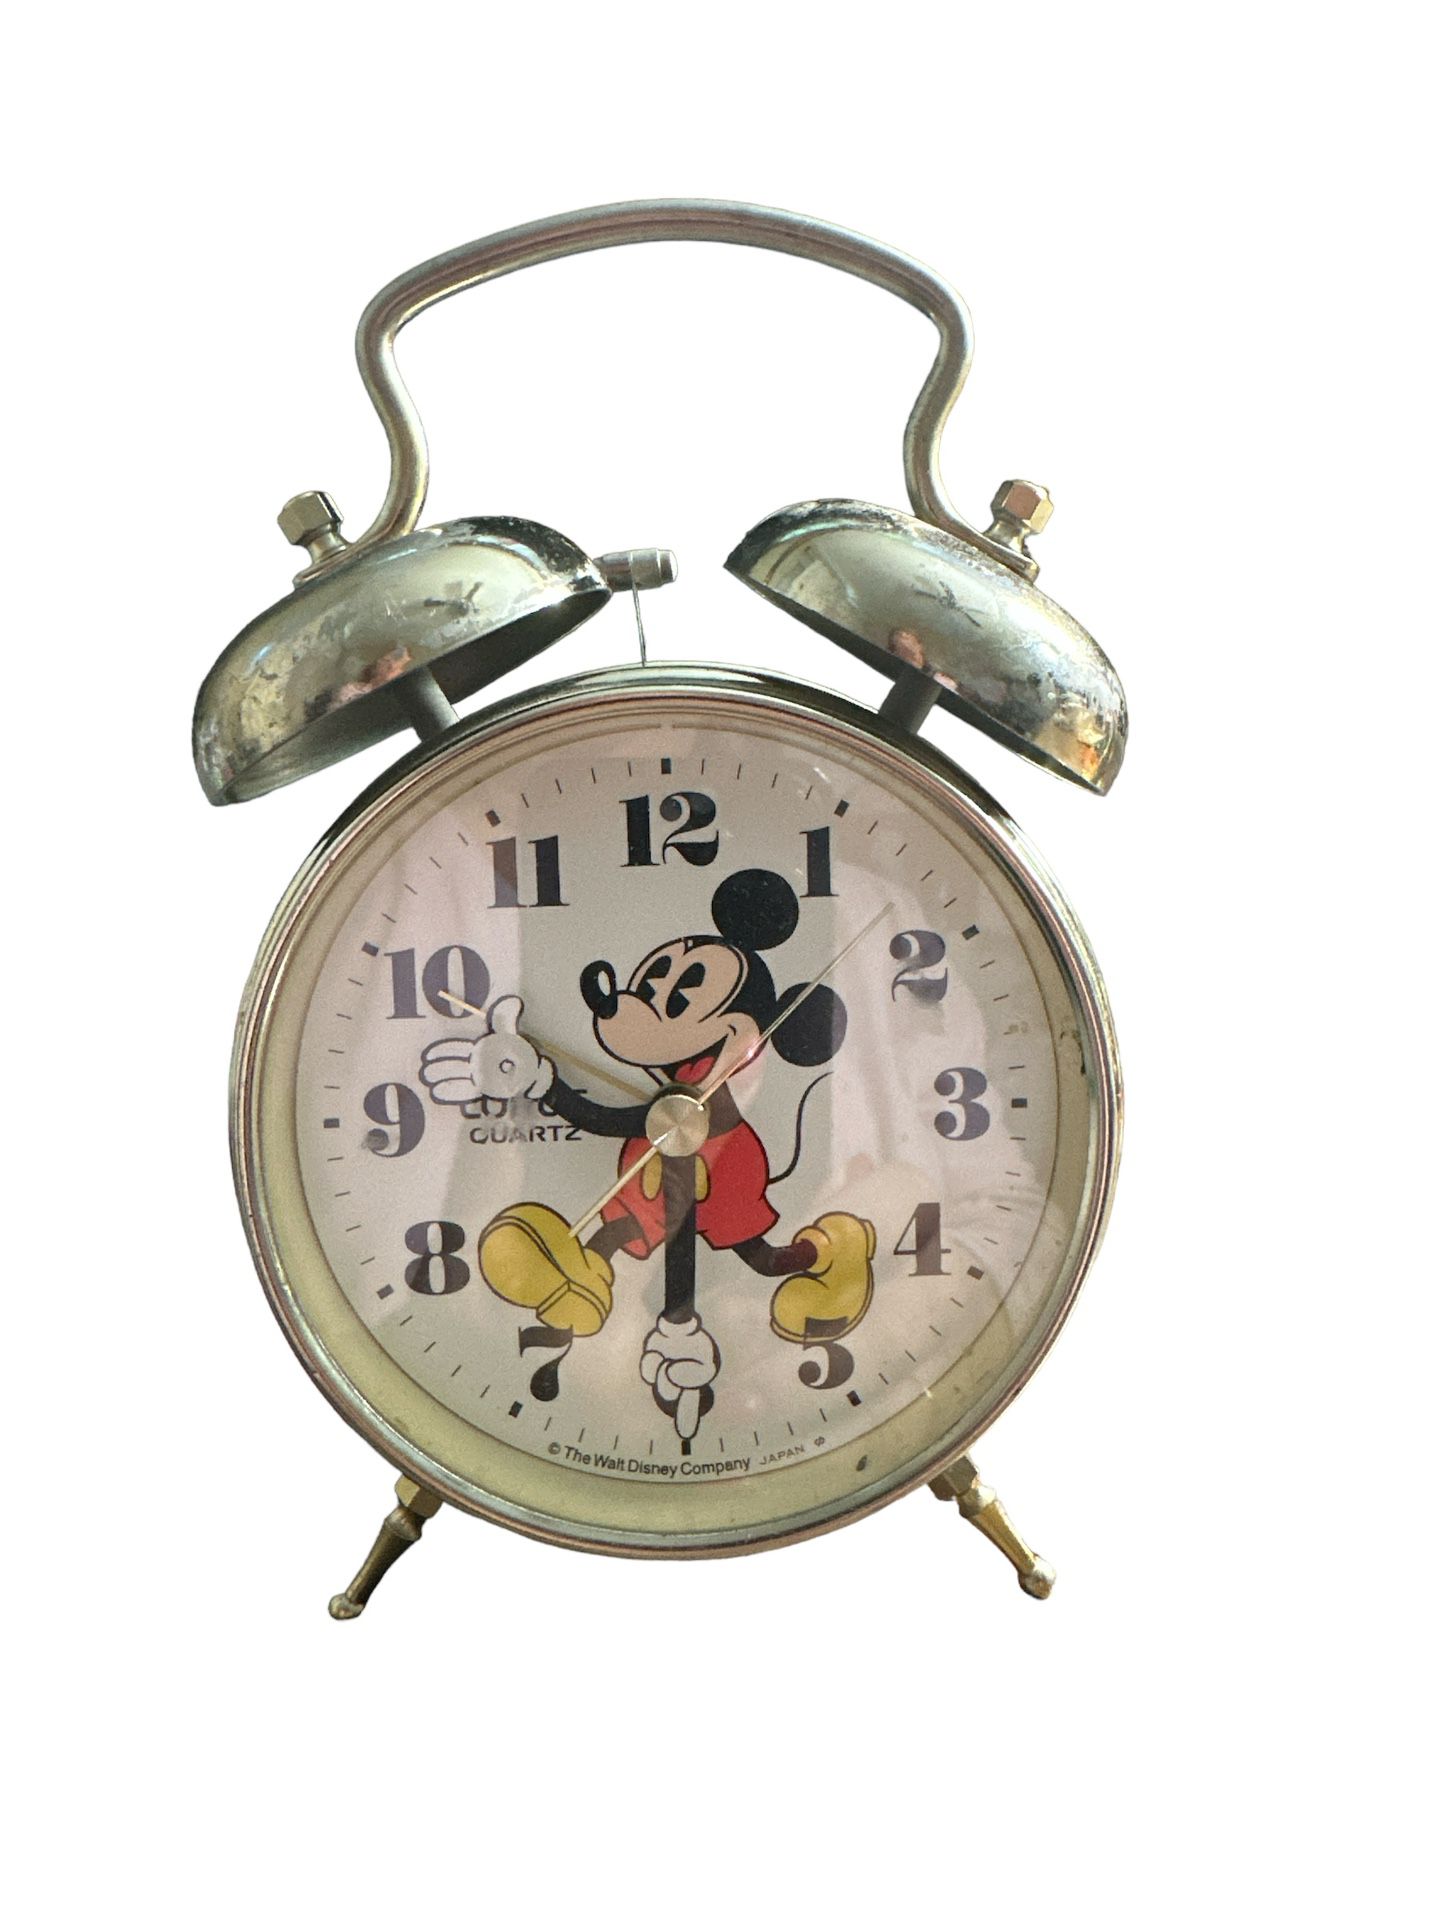 DISNEY MICKEY MOUSE SilveALARM CLOCK LORUS QUARTZ. Condition is "Used". Clock and alarm have both been tested and are in excellent working condition! 